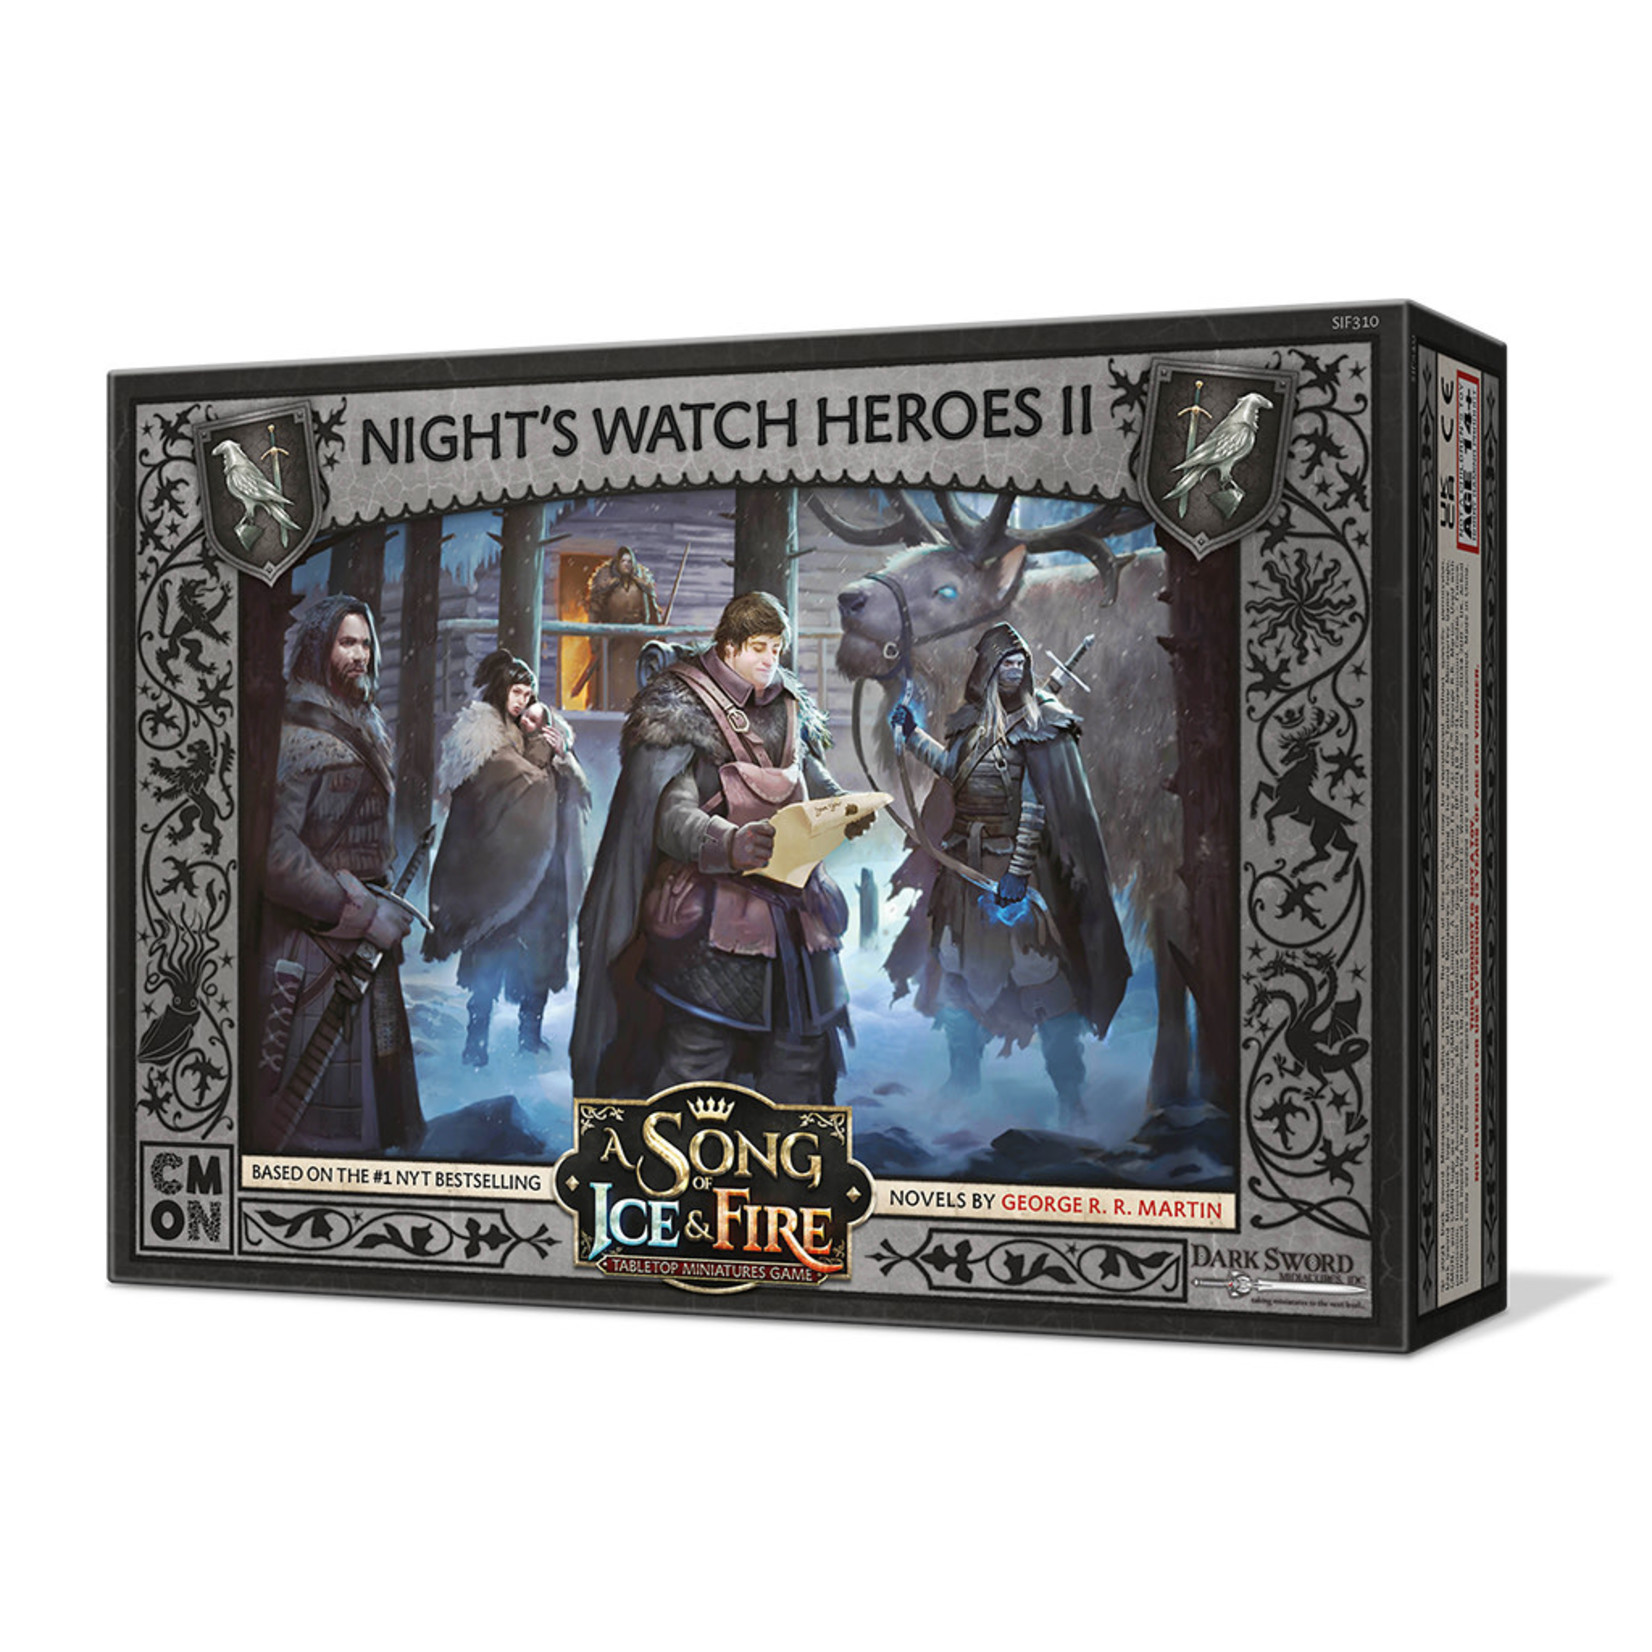 A Song of Ice and Fire: Night’s Watch Heroes 2